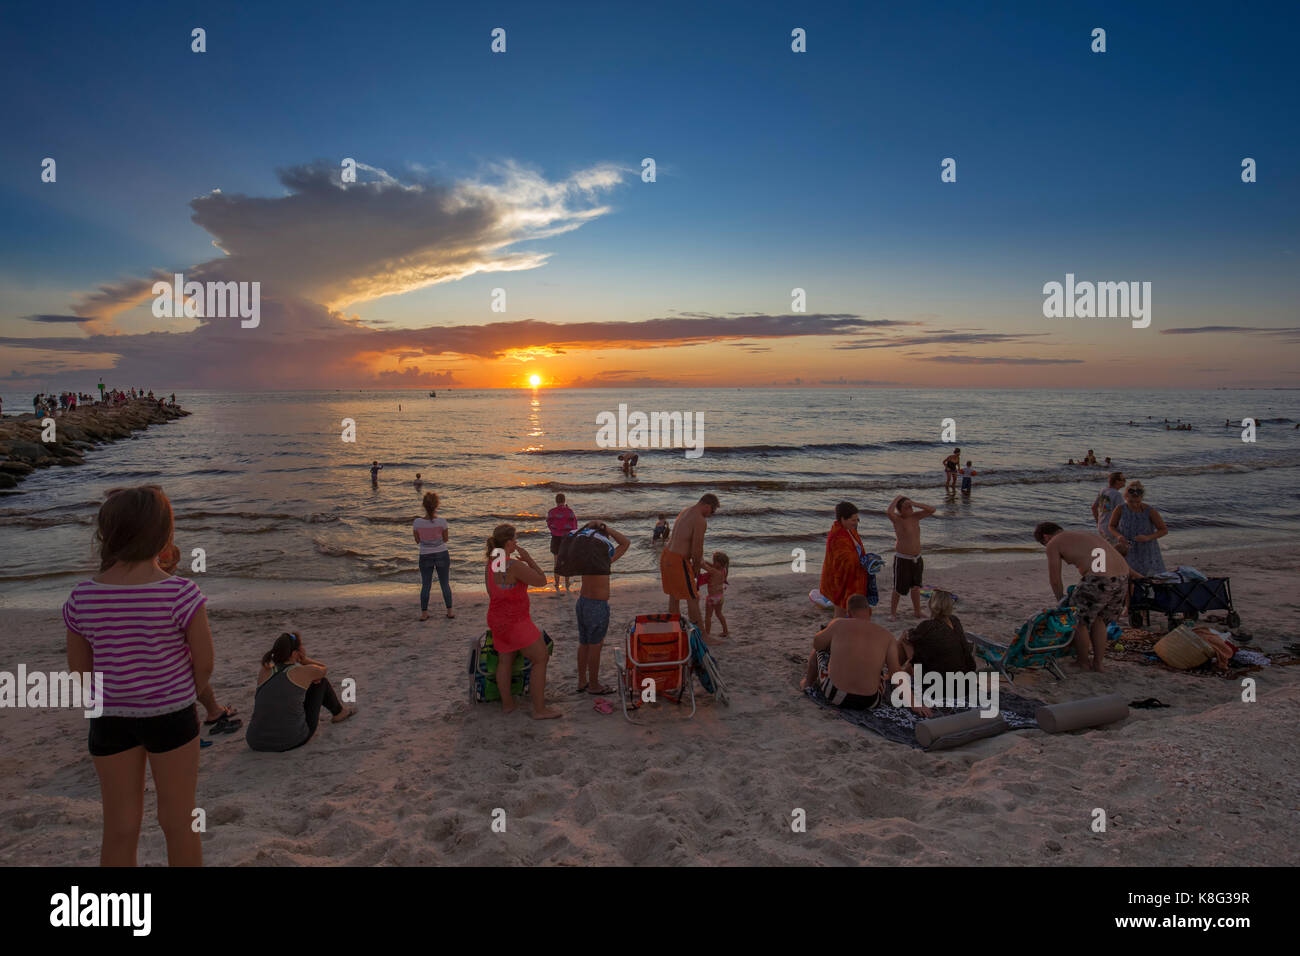 People watching sunset at North Jetty over the Gulf of Mexico in Nokomis Florida Stock Photo